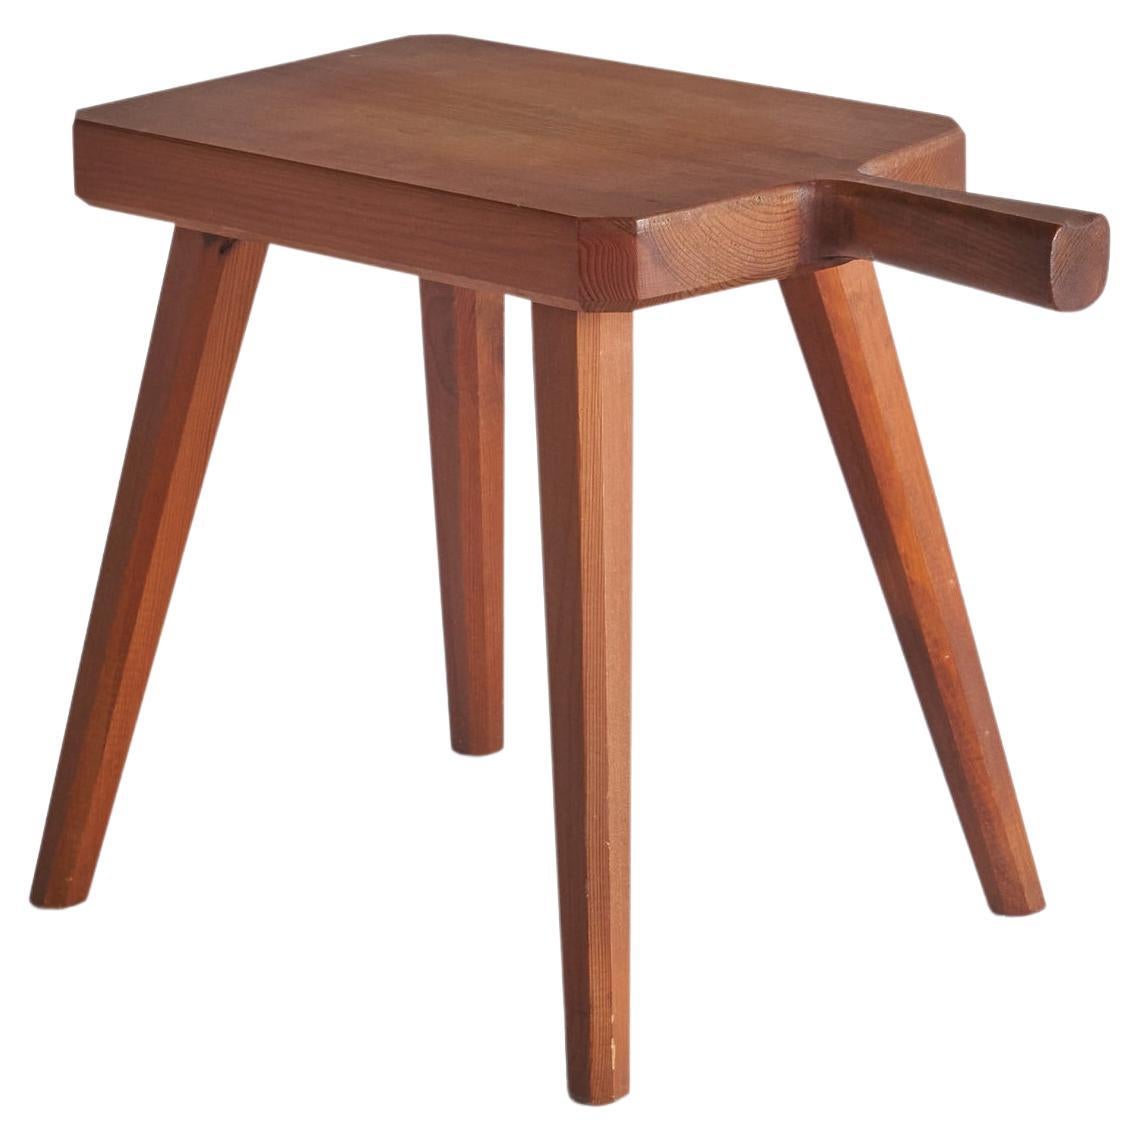 Swedish Designer, Stool, Stained Solid Pine, Sweden, 1970s For Sale